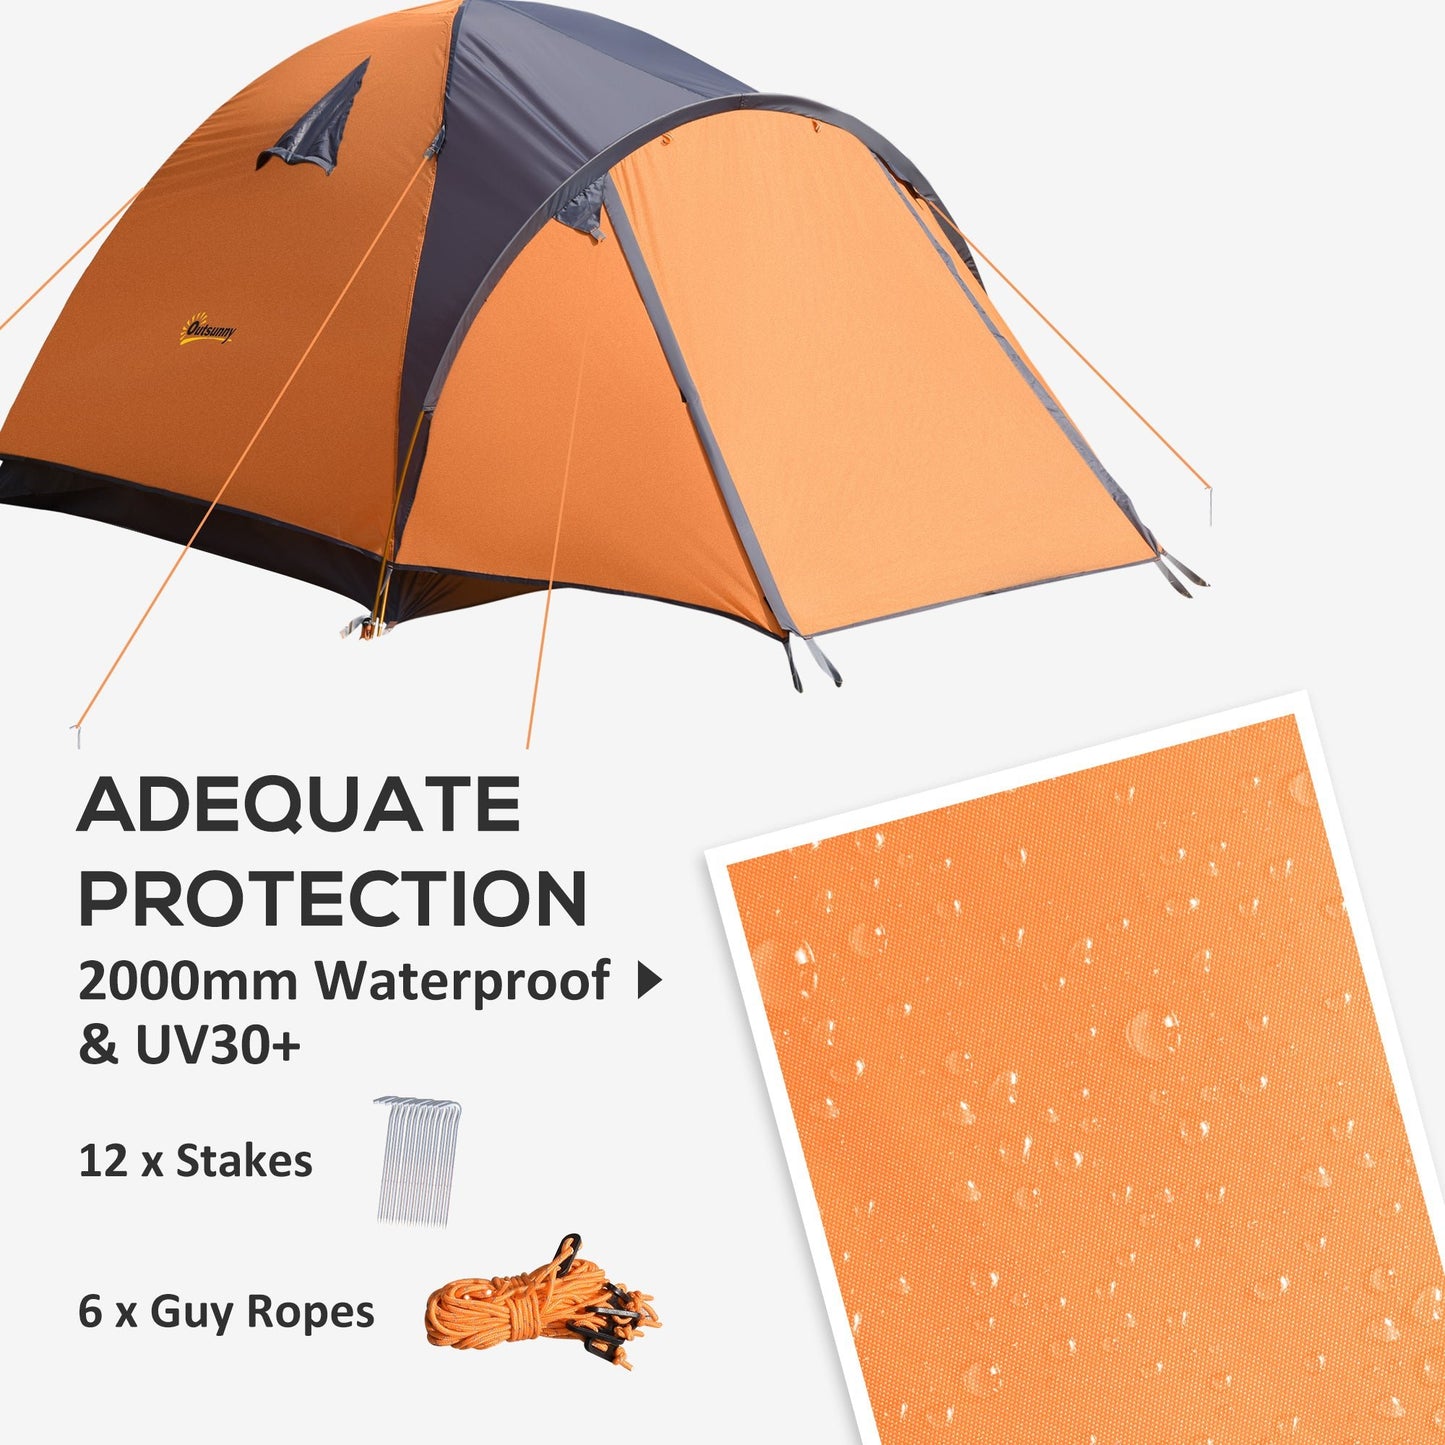 Miscellaneous-3/4 Person Pop Up Camping Tent, Waterproof Pop Up Tent, Portable Backpacking Shelter with Mesh Windows and 3 Doors - Outdoor Style Company